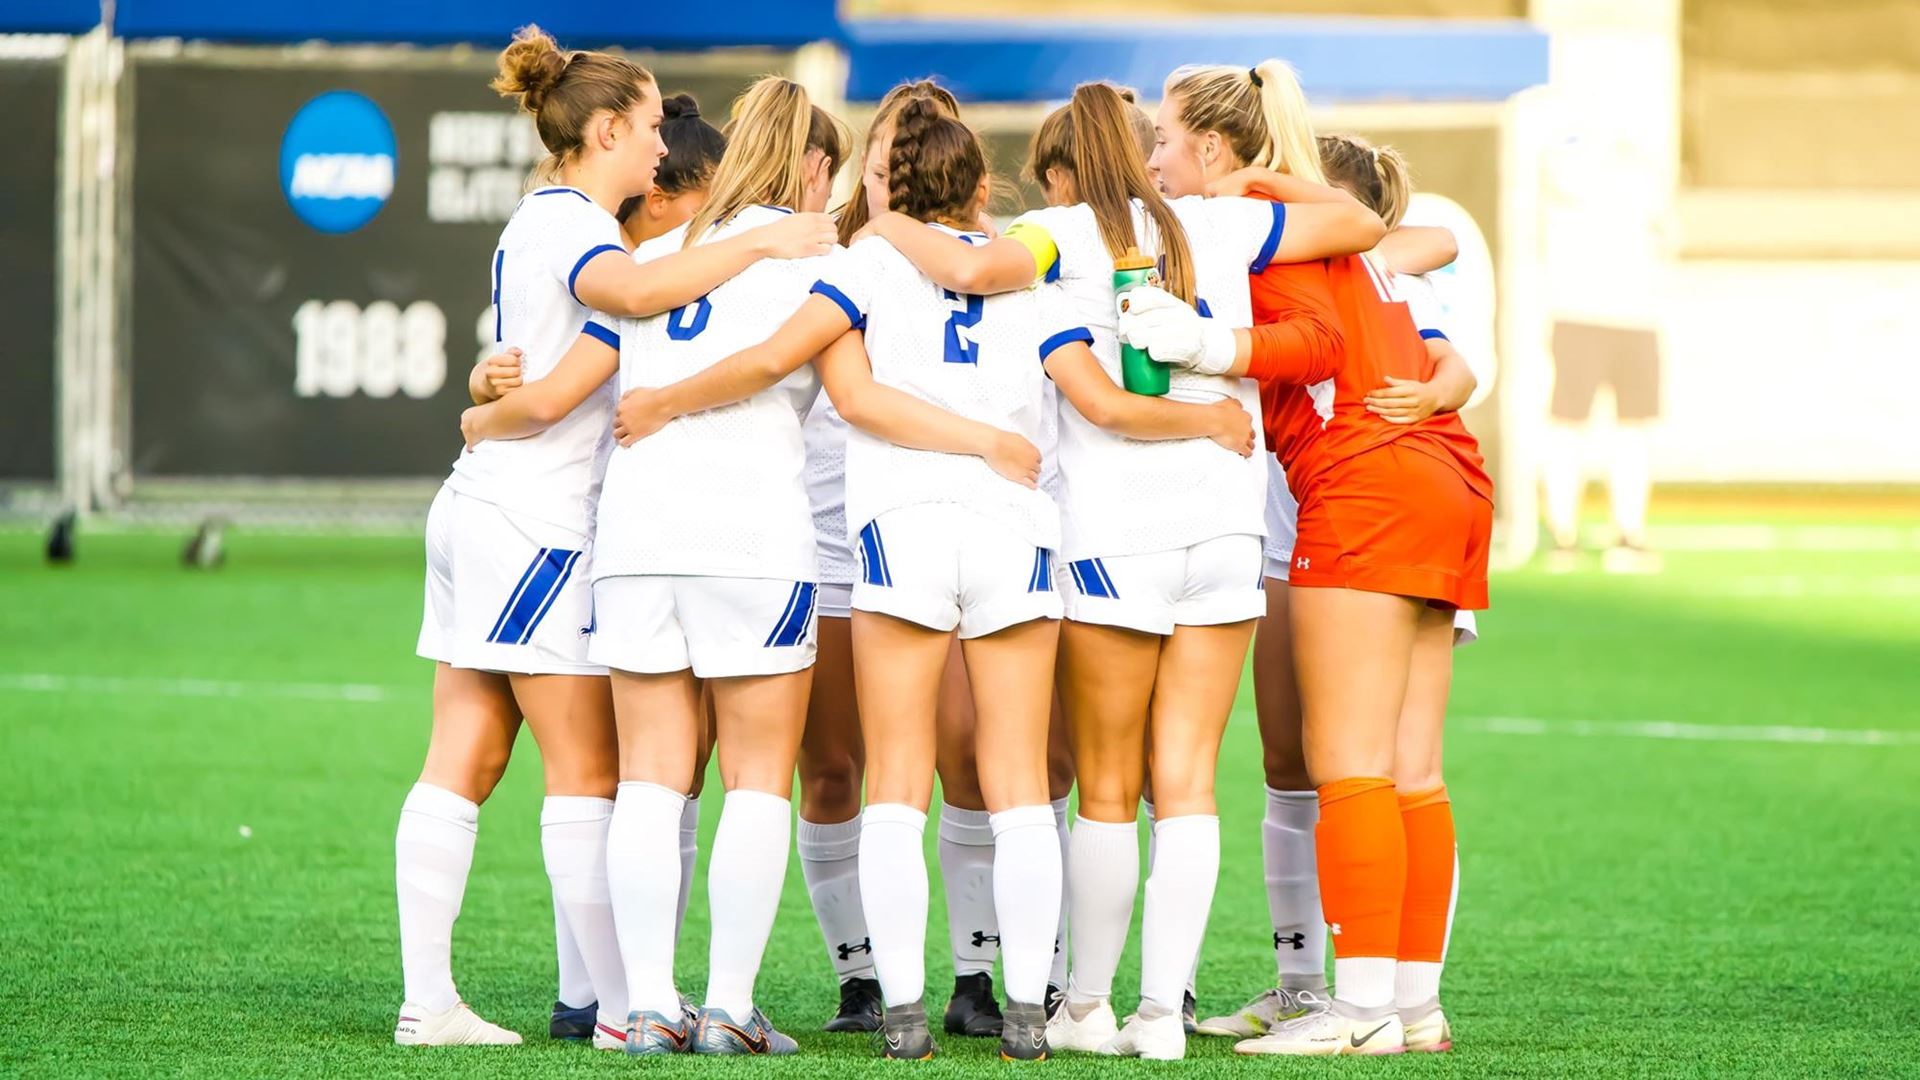 The Seton Hall women's soccer team huddles before a game at home.